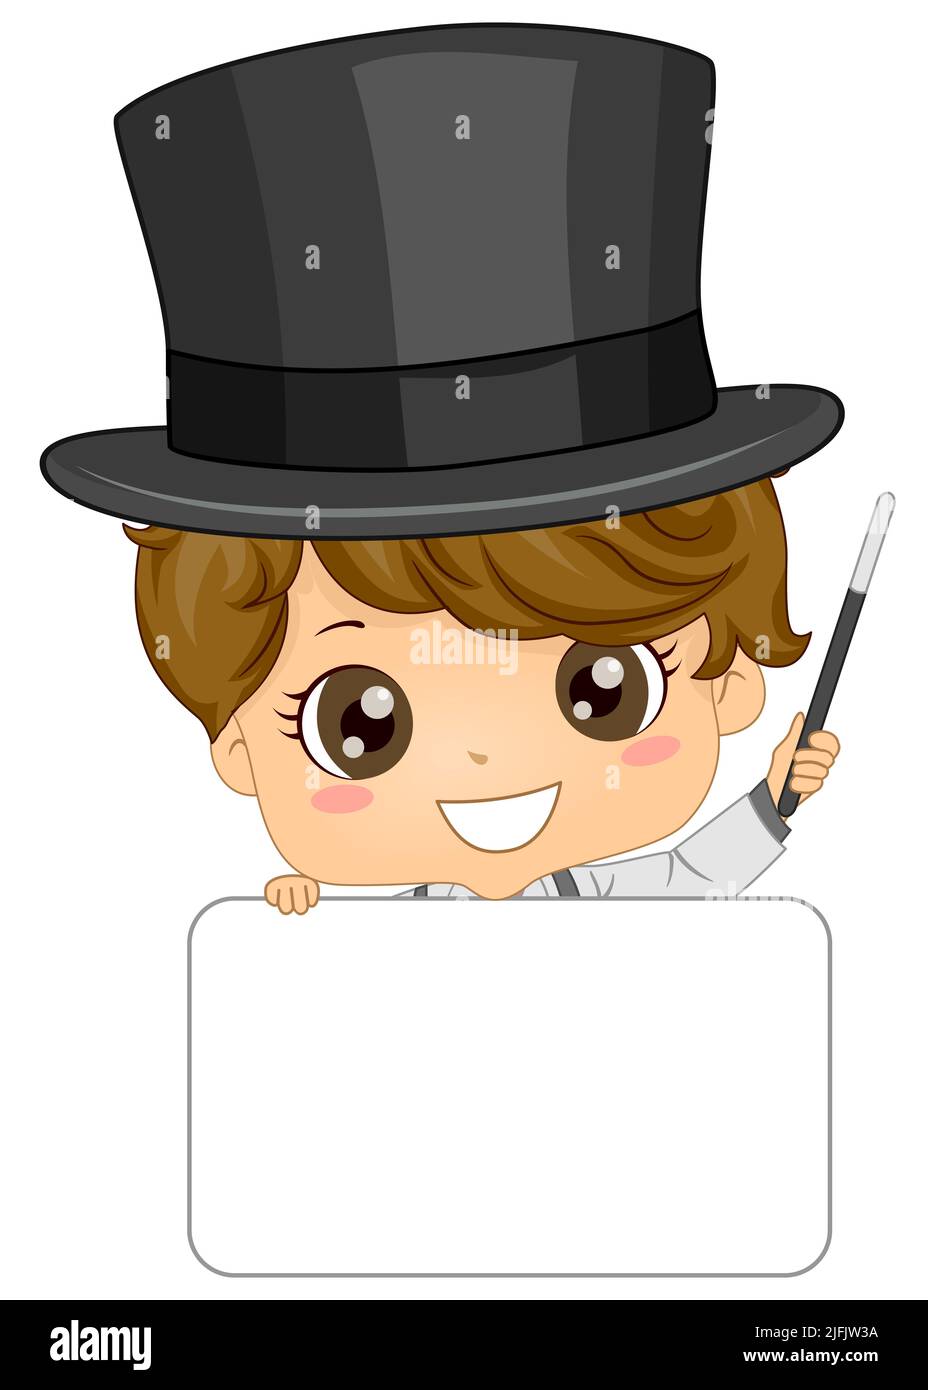 Illustration of Kid Boy Wearing Black Top Hat Holding Blank White Board and Magic Wand Stock Photo